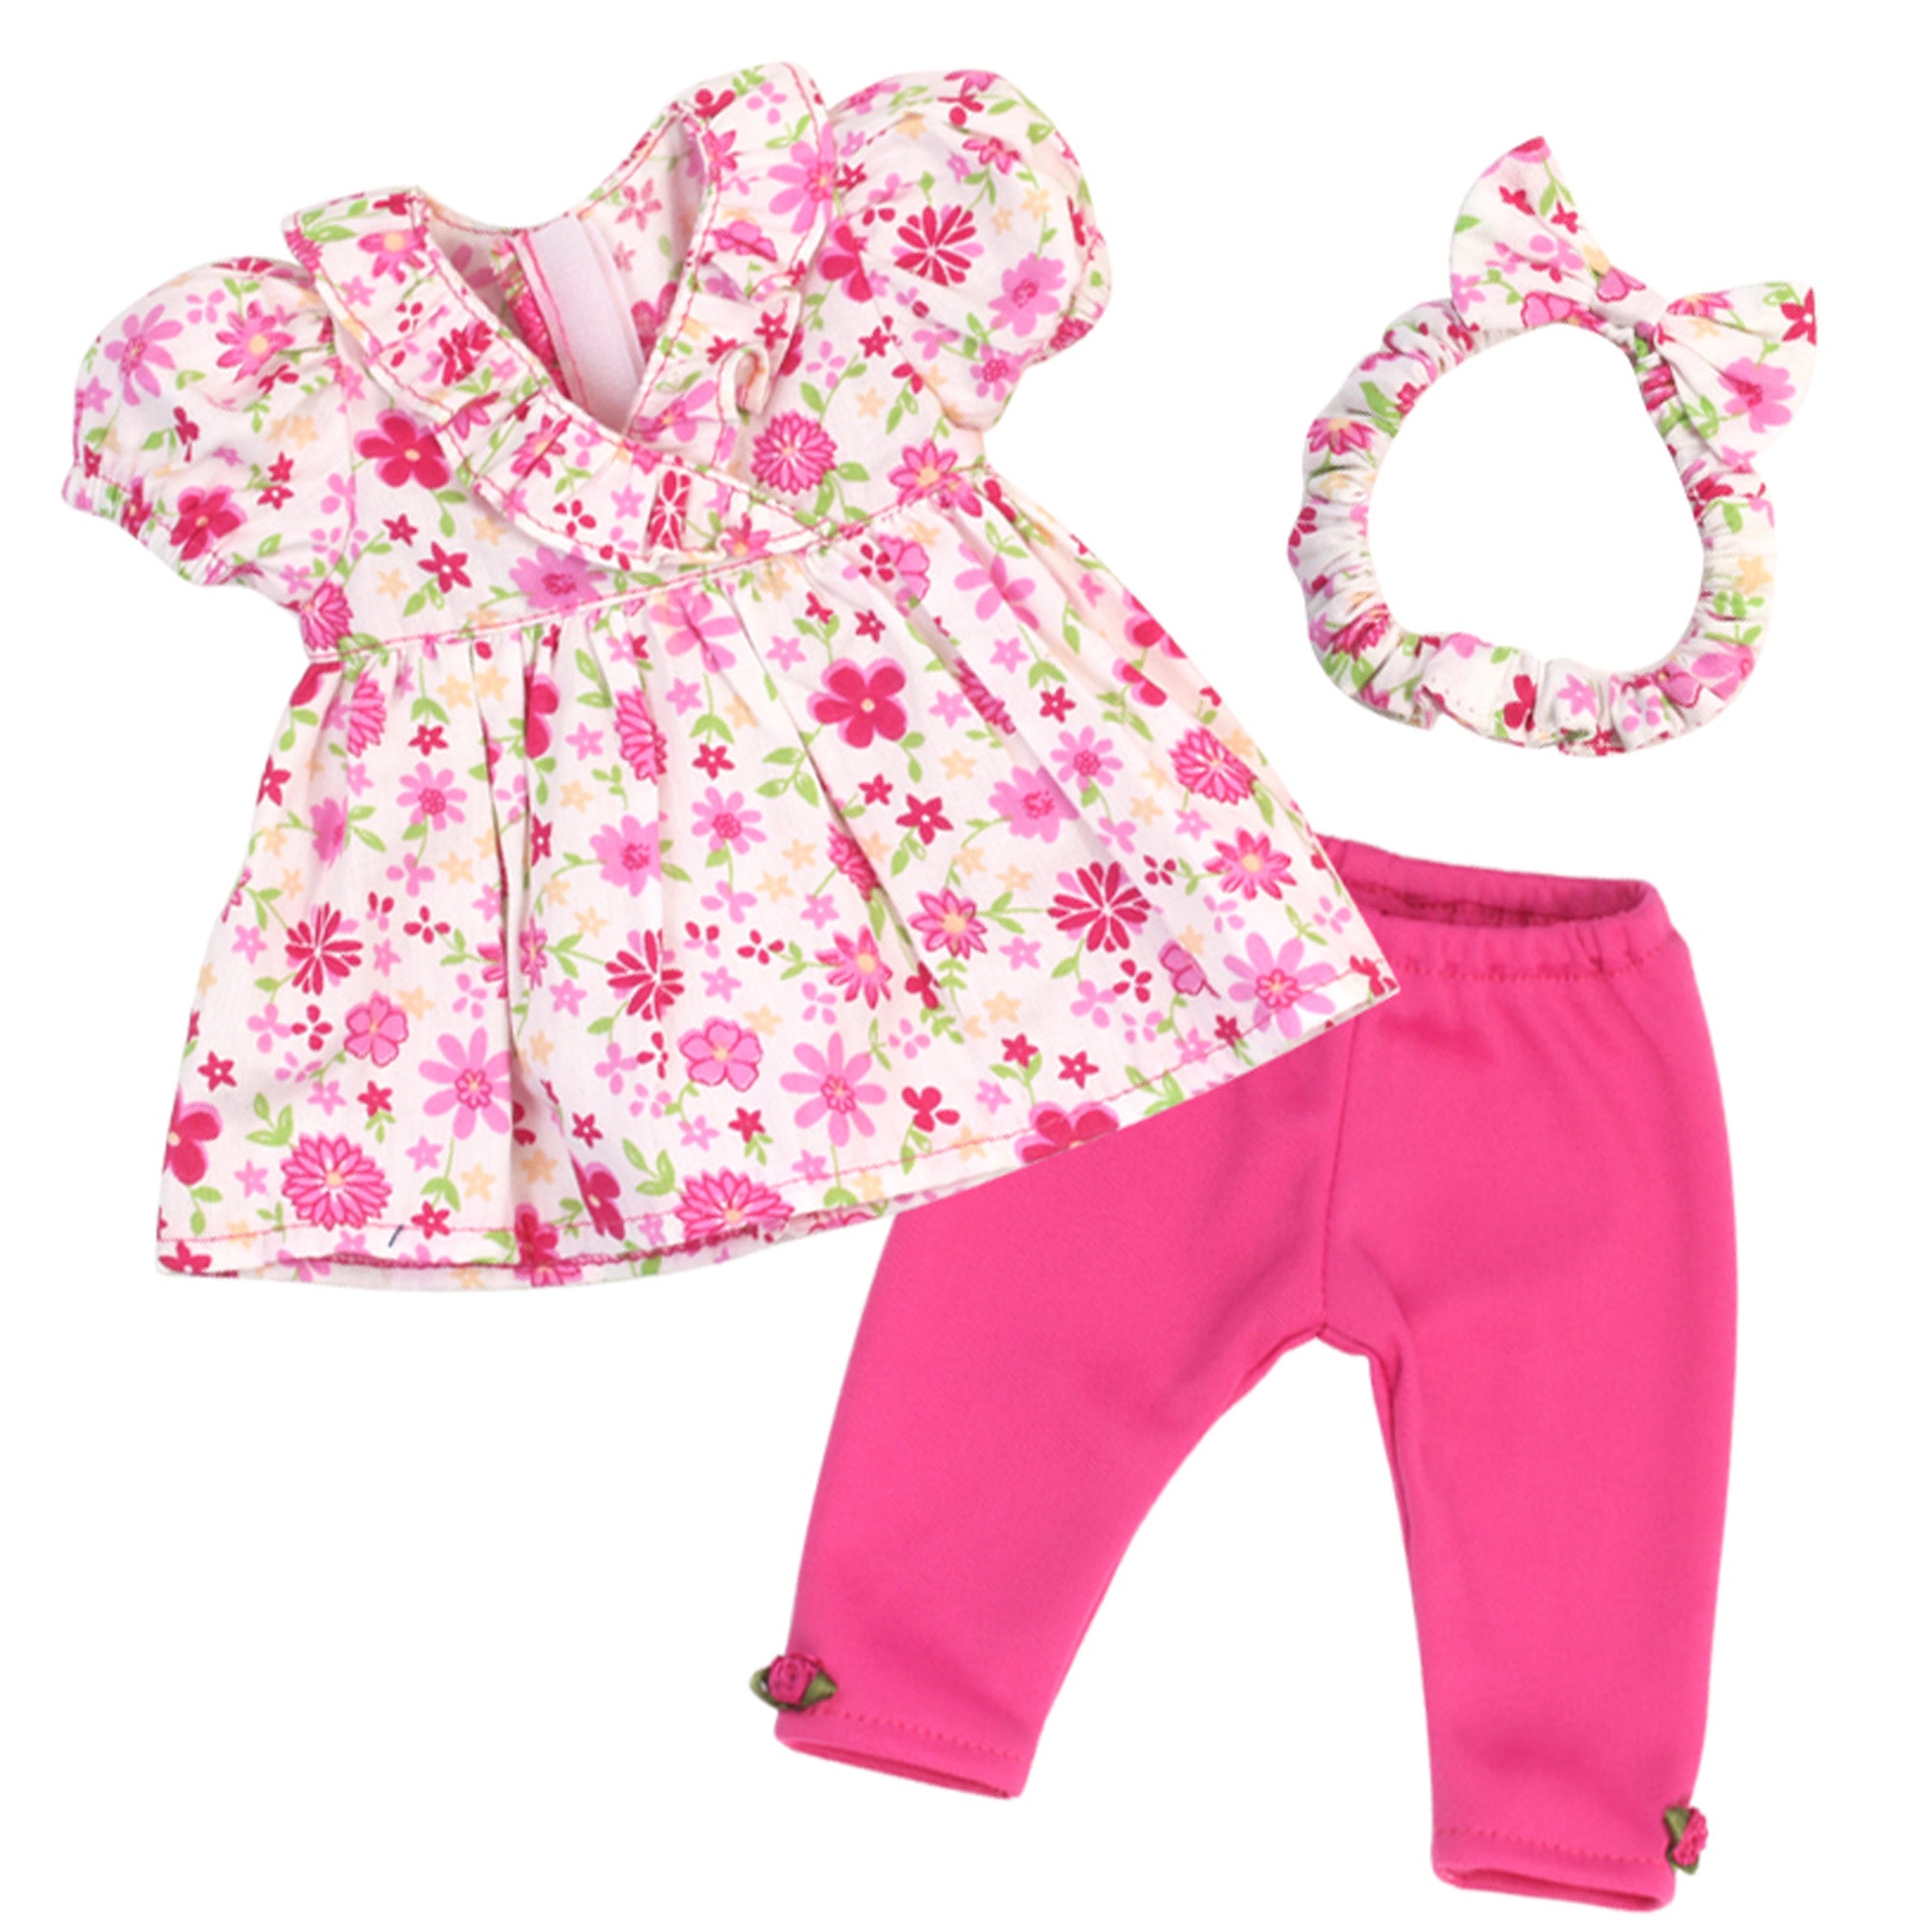 Sophia’s Pleated Floral Top, Leggings, & Headband with Bow Outfit Set for 12” Baby Dolls, Hot Pink